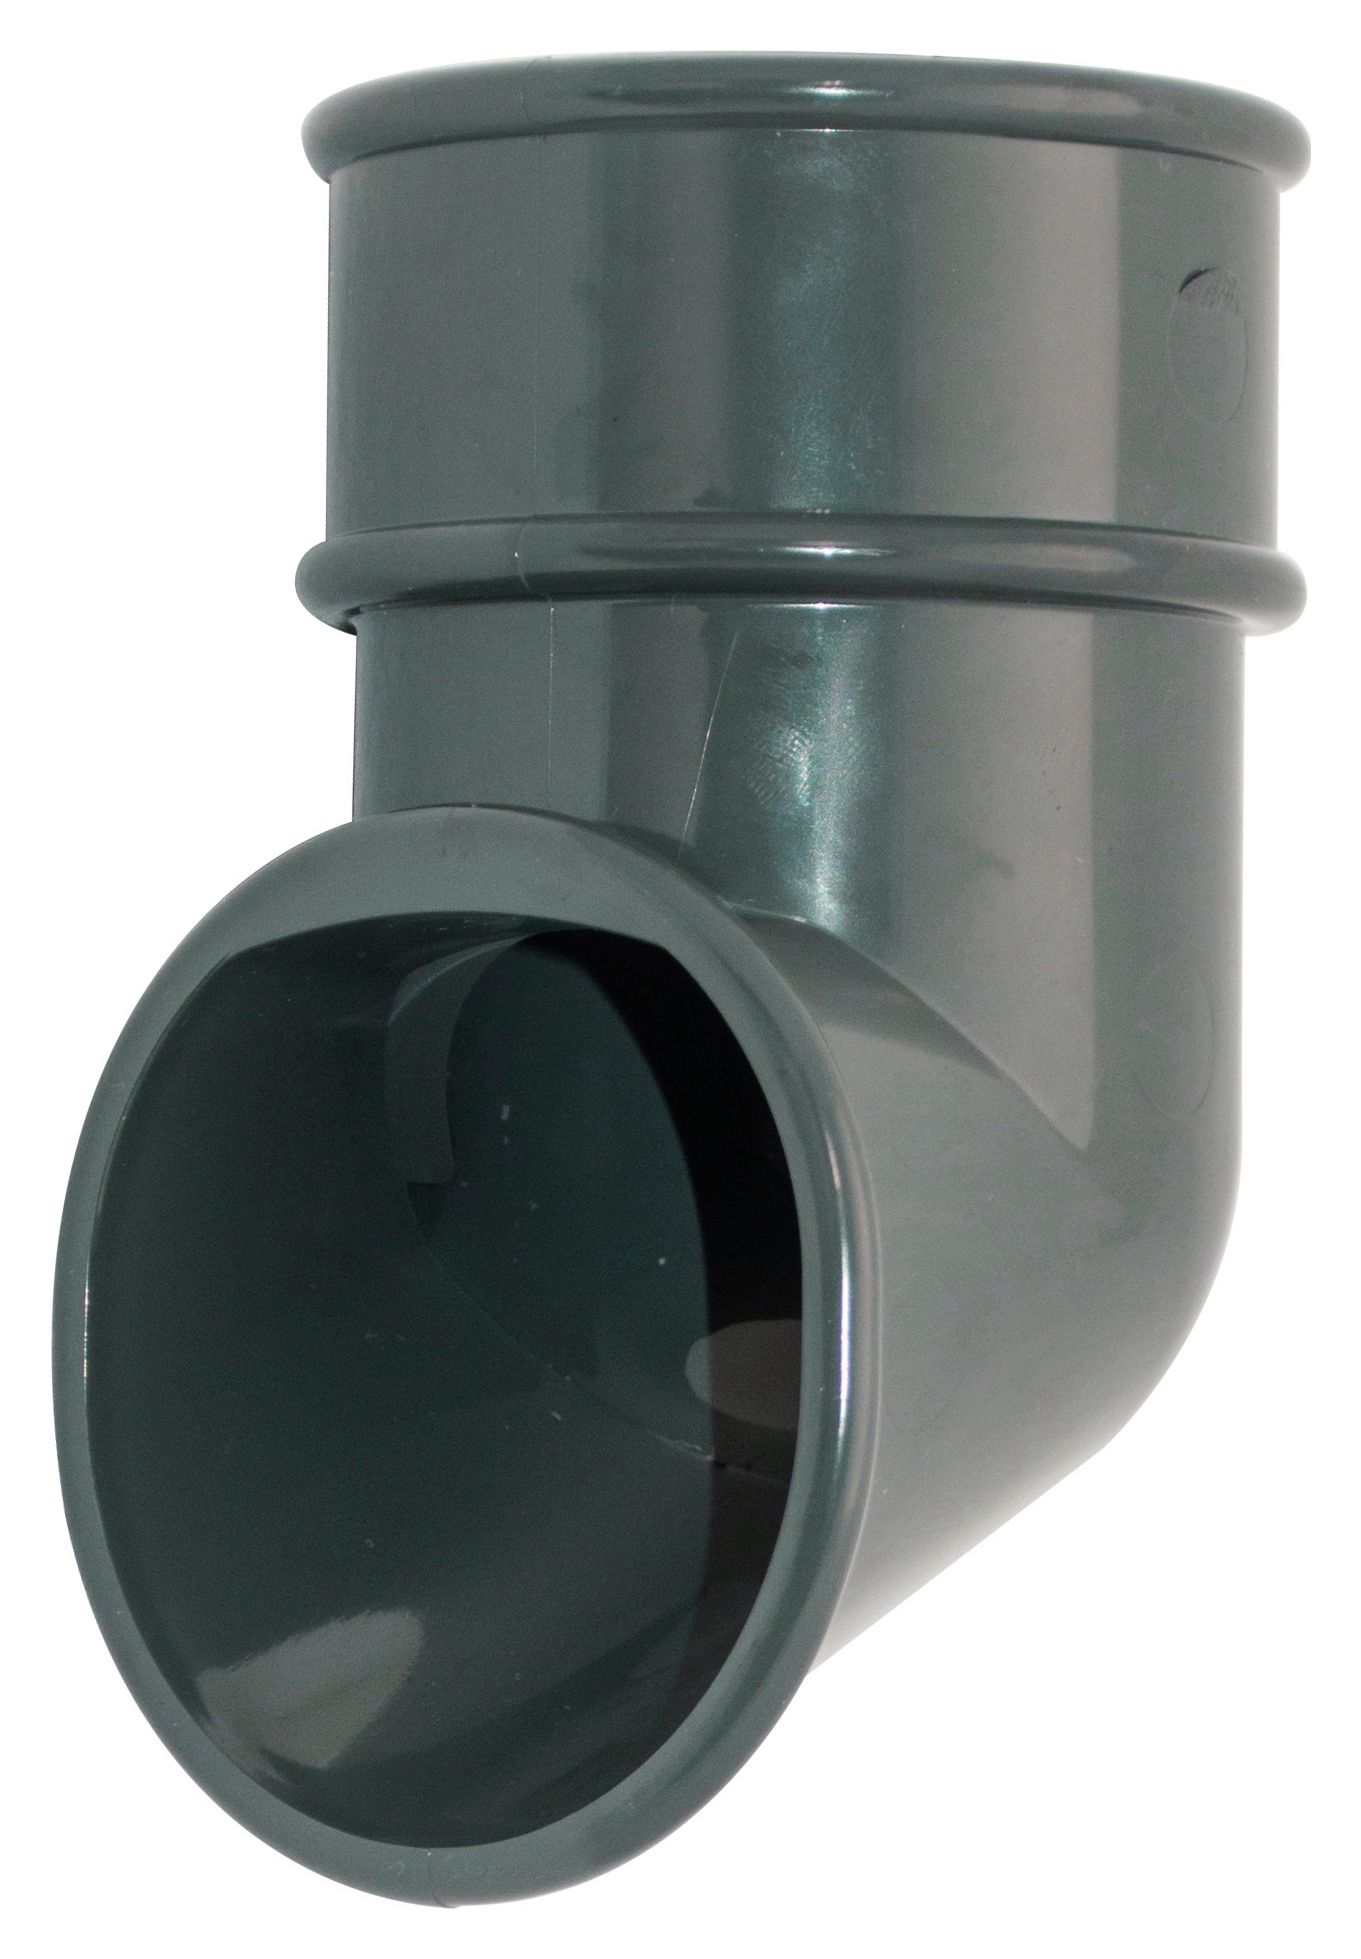 FloPlast 68mm Round Line Downpipe Shoe - Anthracite Grey